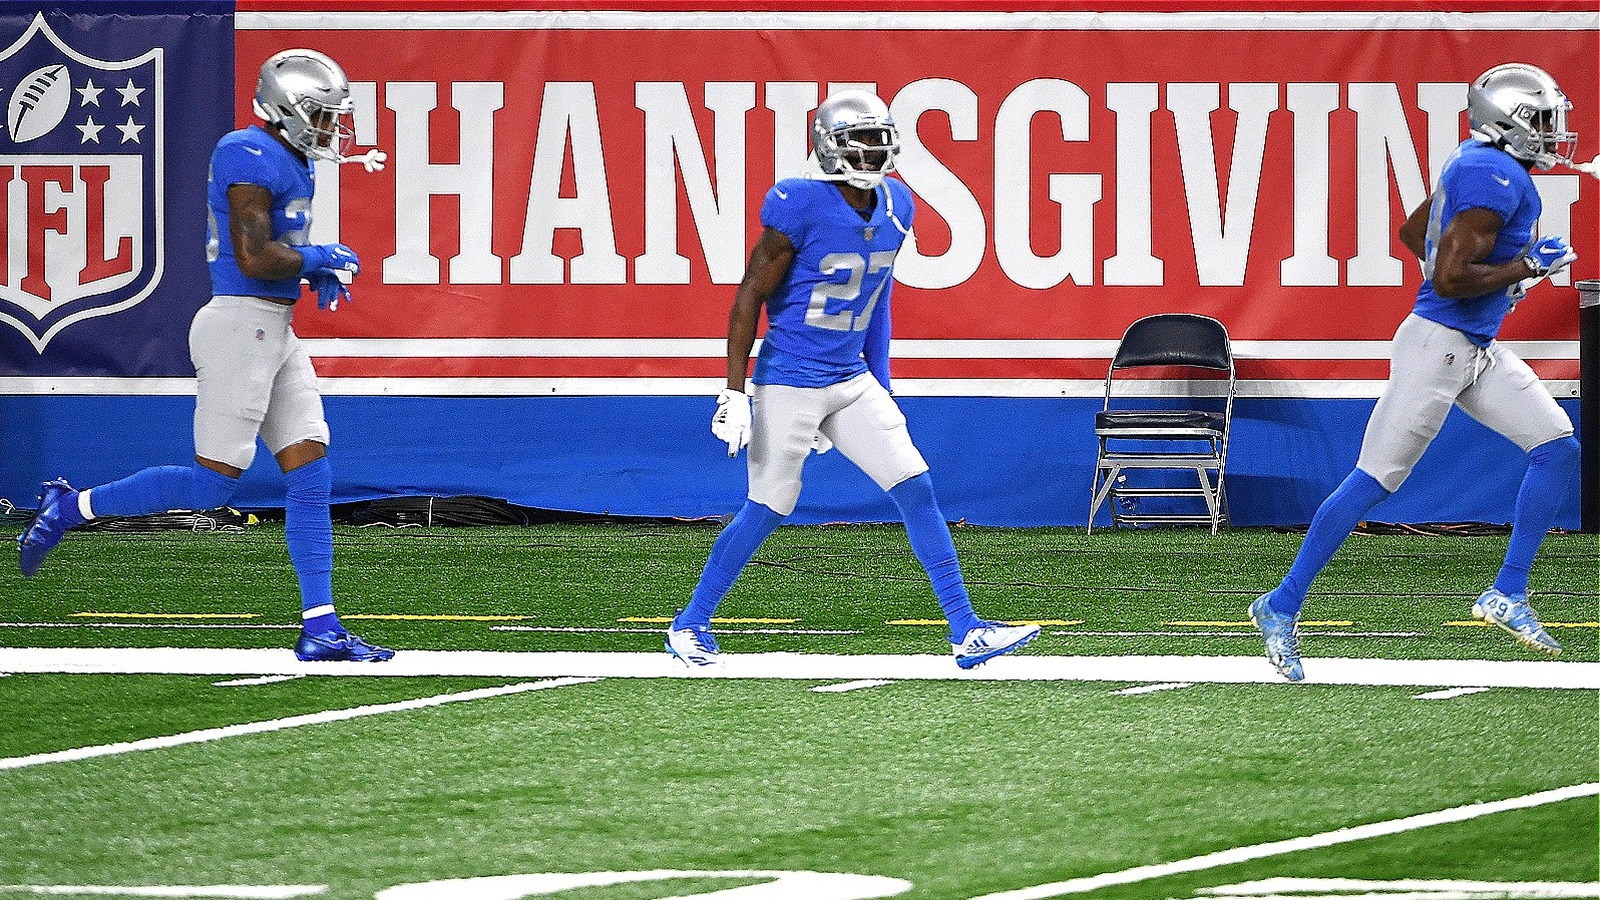 Why Do The Cowboys And Lions Always Play On Thanksgiving Day?